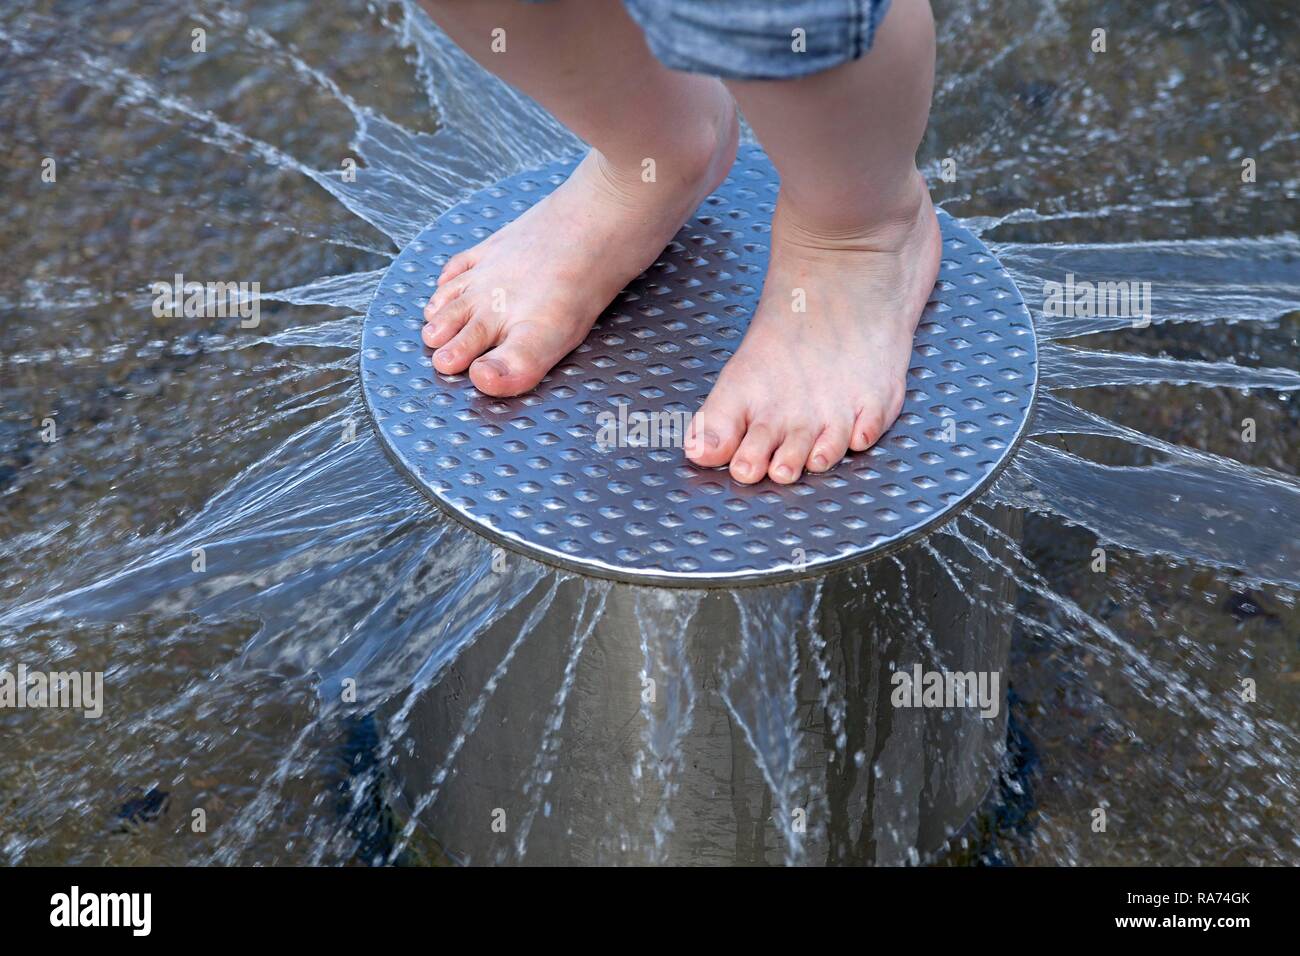 Child's feet on a metal plate with water squirting out Stock Photo